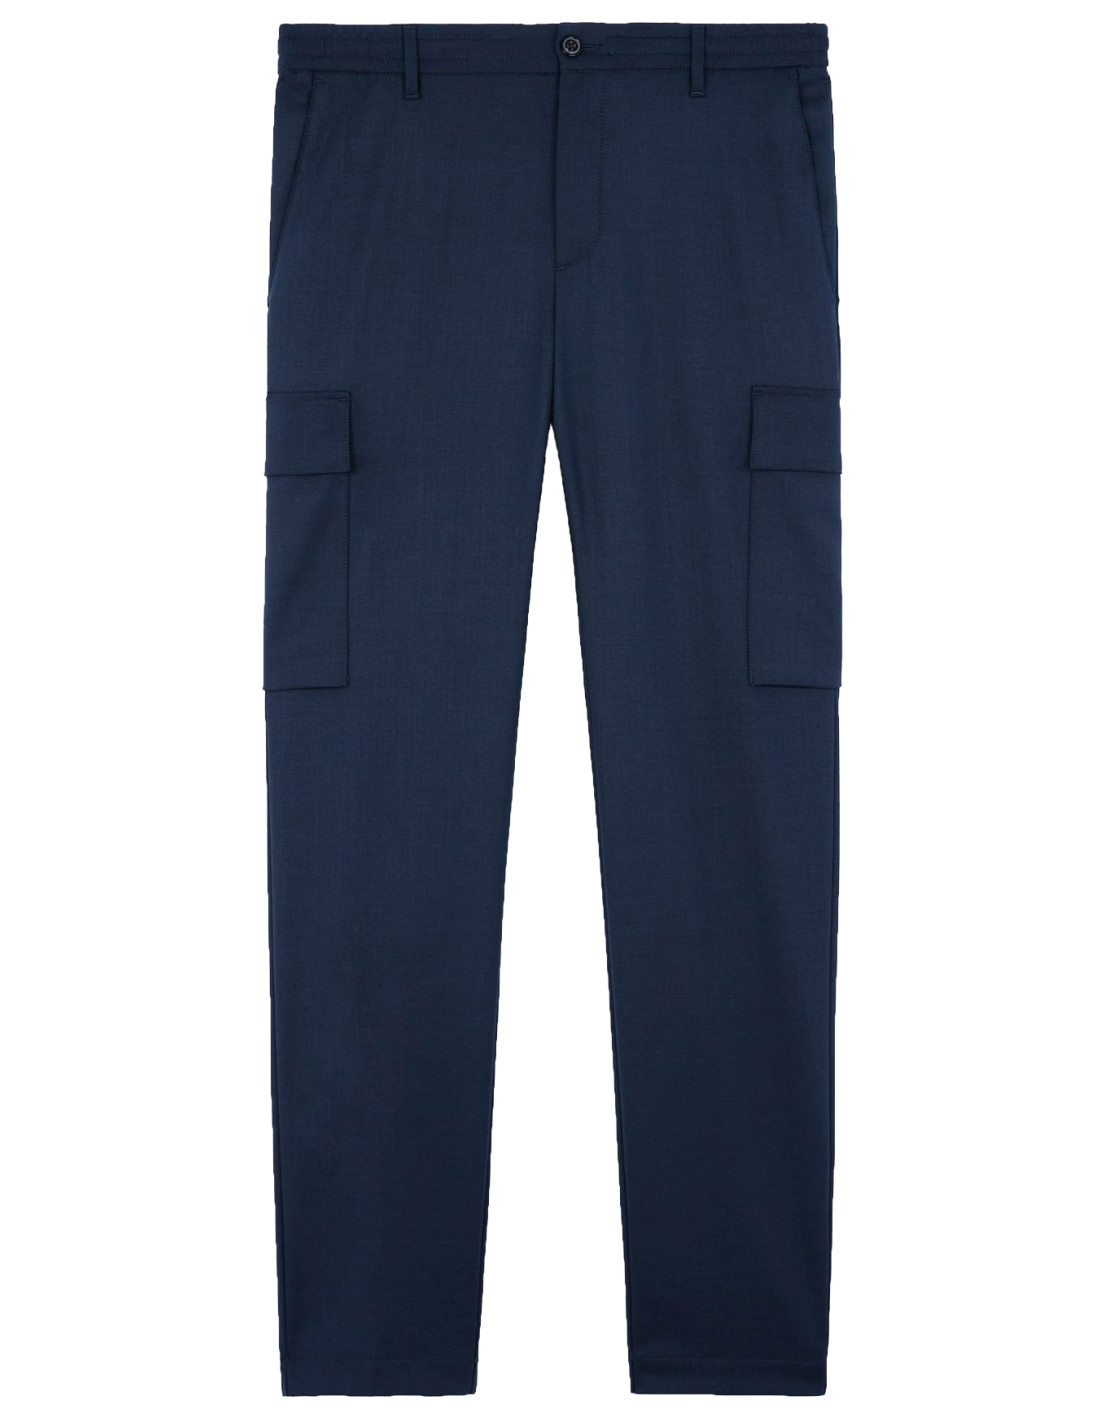 CARGO LEISURE TROUSERS